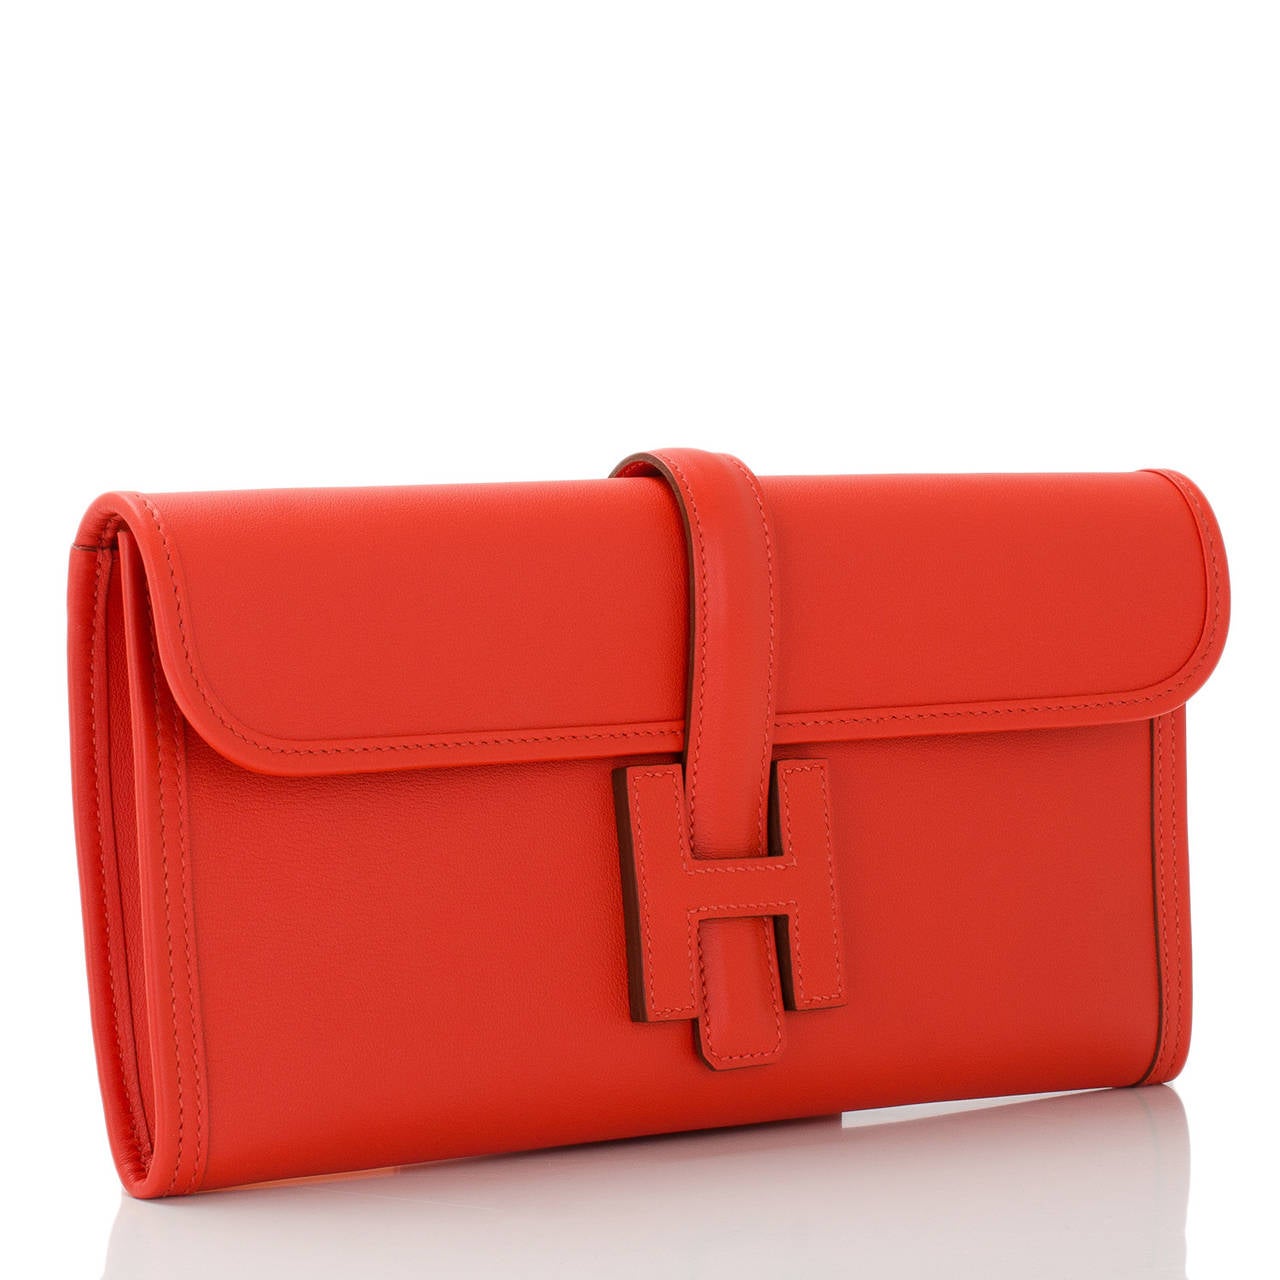 Hermes Capucine swift leather Jige Elan clutch 29cm

This style features tonal stitching and front "H" pullover tab closure.

The interior is lined in Capucine lambskin leather.

Collection: R square

Origin: France

Condition: